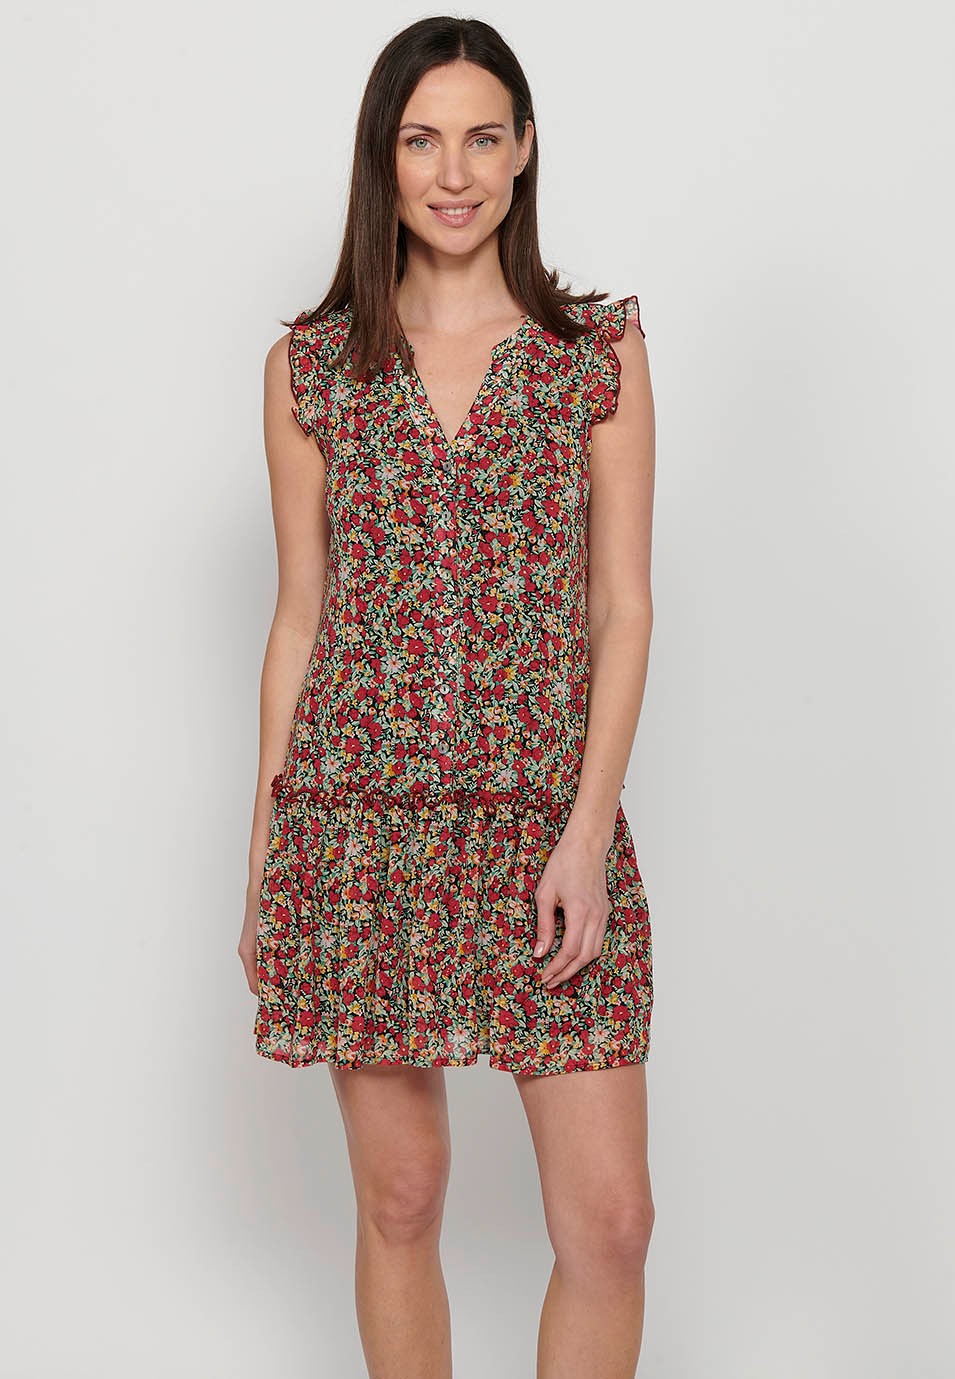 Short shirt dress with hip cut and ruffle finish with button front closure and Multicolor floral print for Women 6